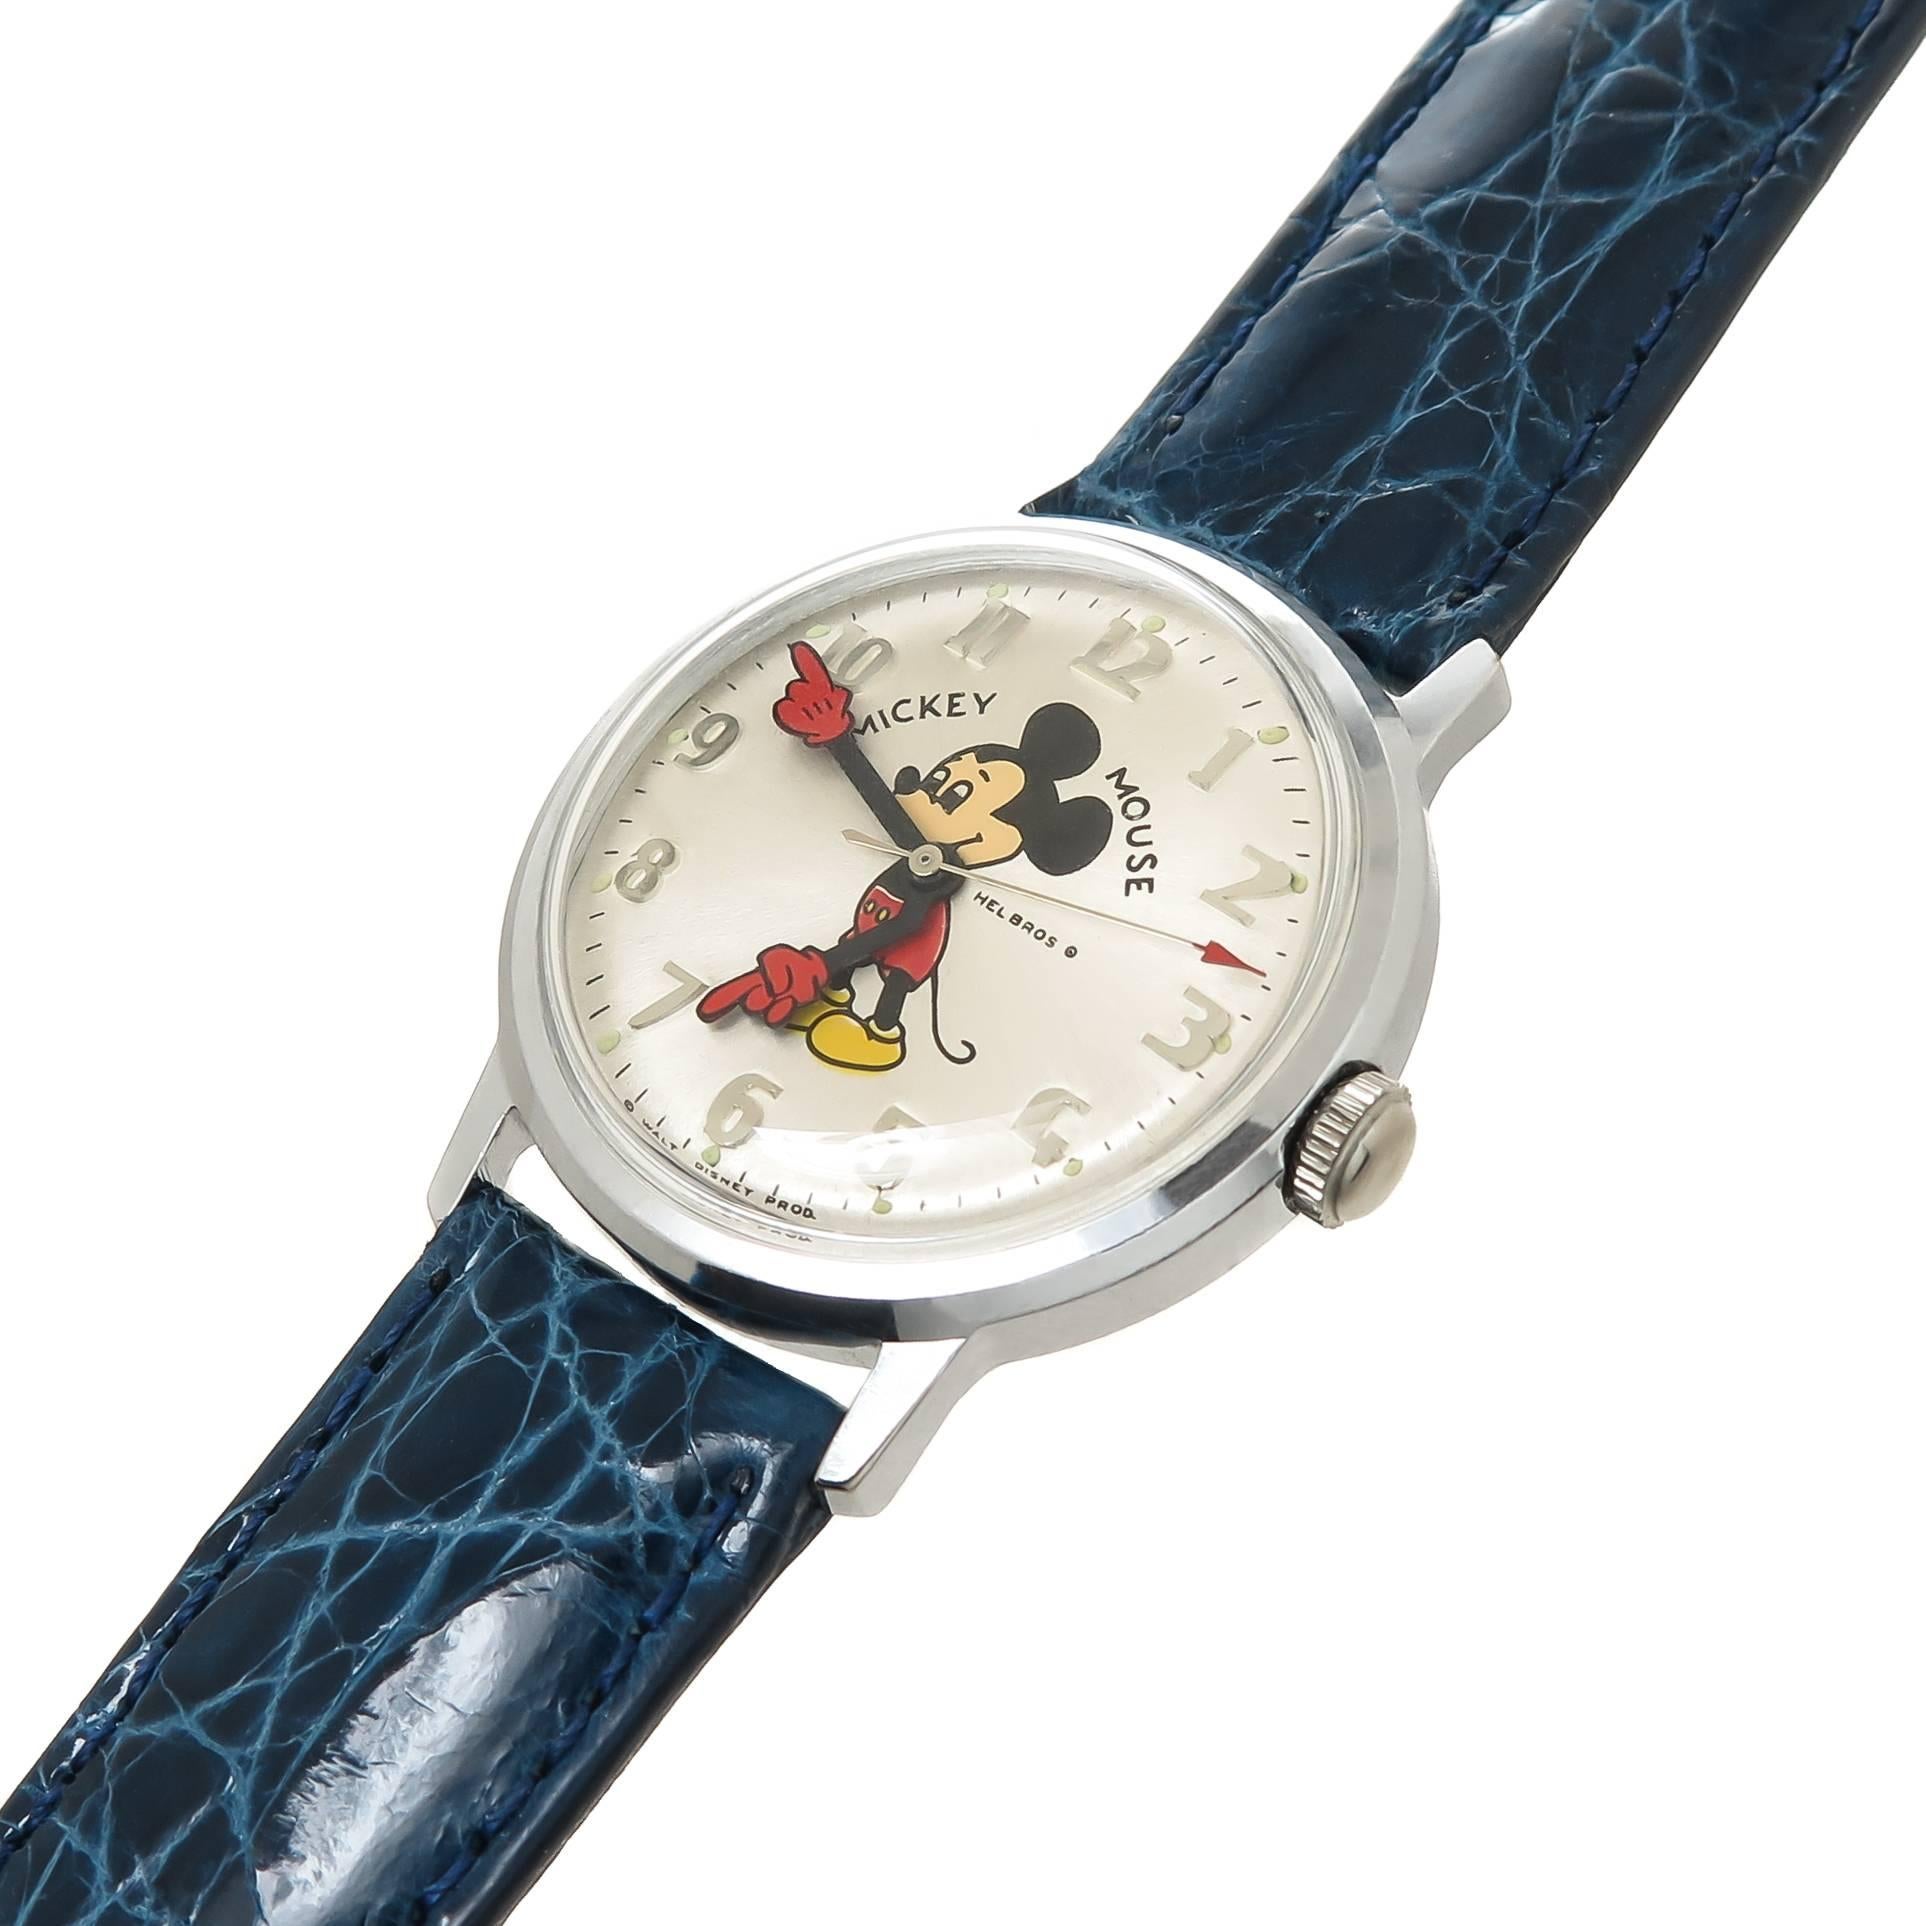 Circa 1970s Helbros Mickey Mouse Wrist Watch, 34 MM Diameter Stainless Steel Water Resistant case also measuring 6 MM thick. 17 Jewel Mechanical, Manual wind Movement. Silvered Dial with Raised markers, sweep seconds hand and a colorful Mickey Mouse